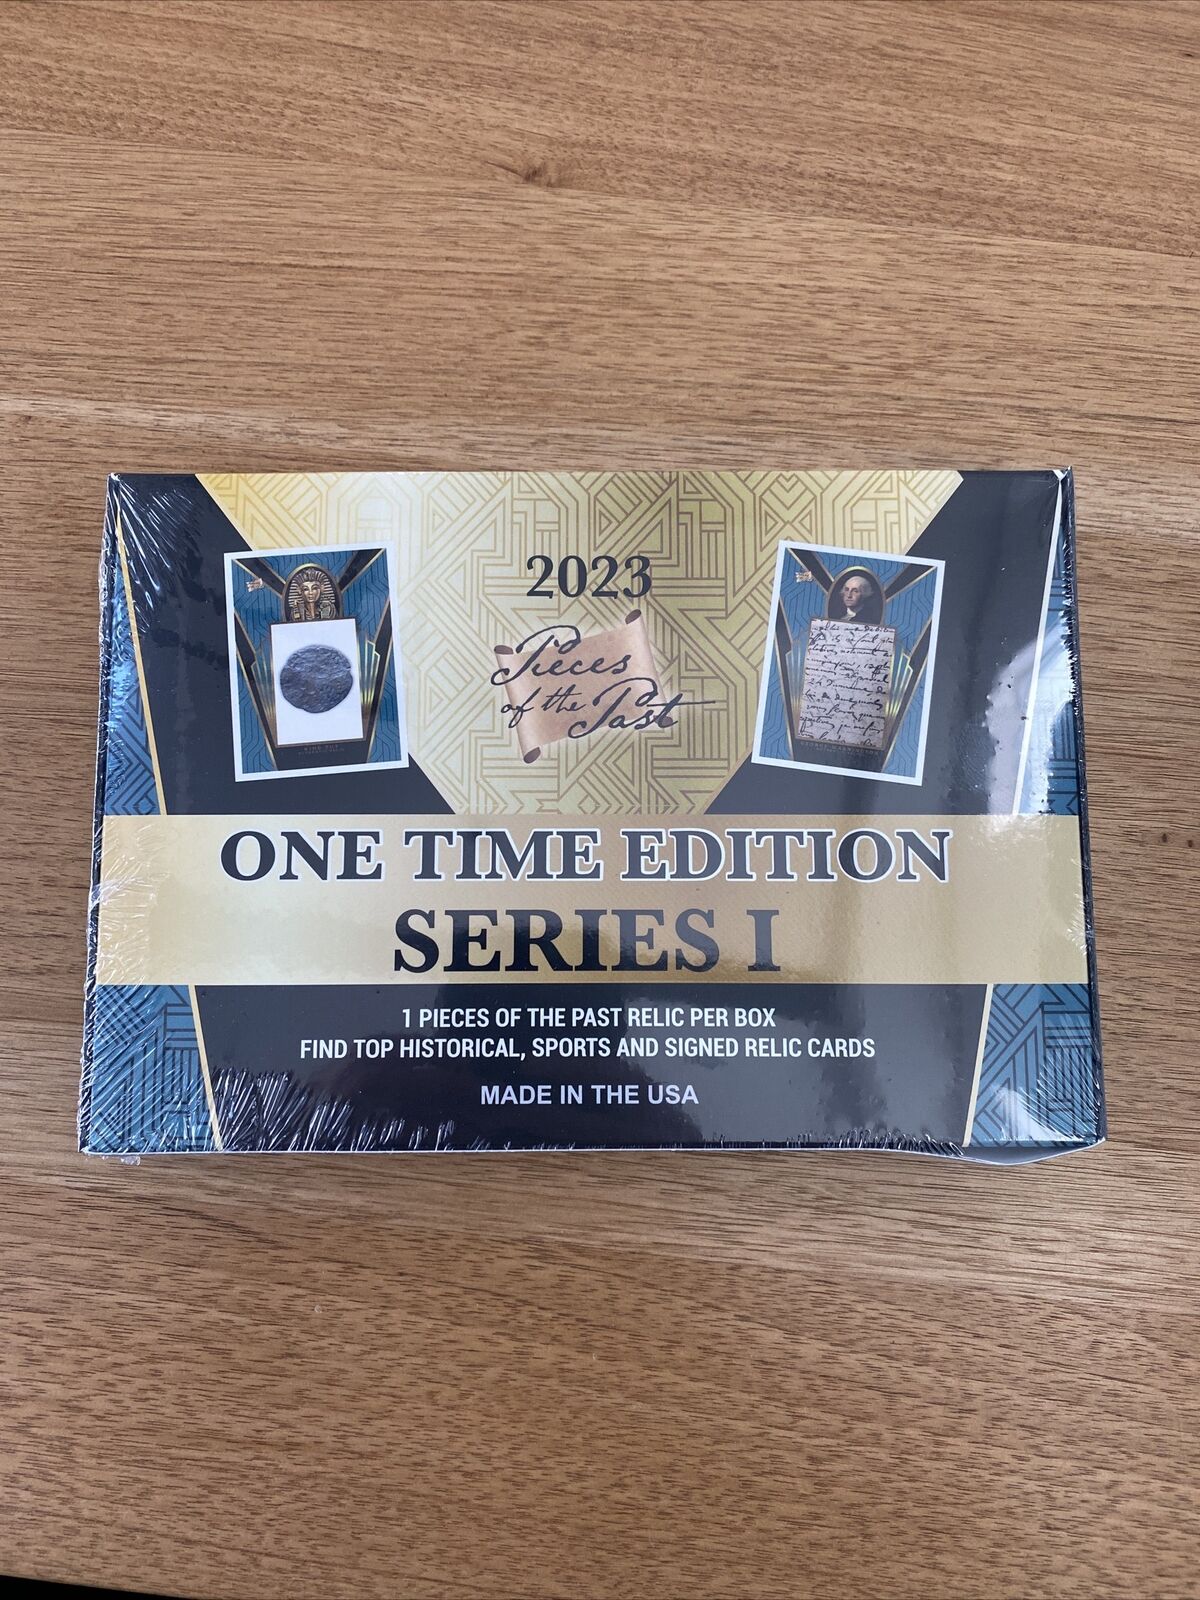 2023 SUPER BREAK PIECES OF THE PAST ONE TIME EDITION BOX SERIES 1